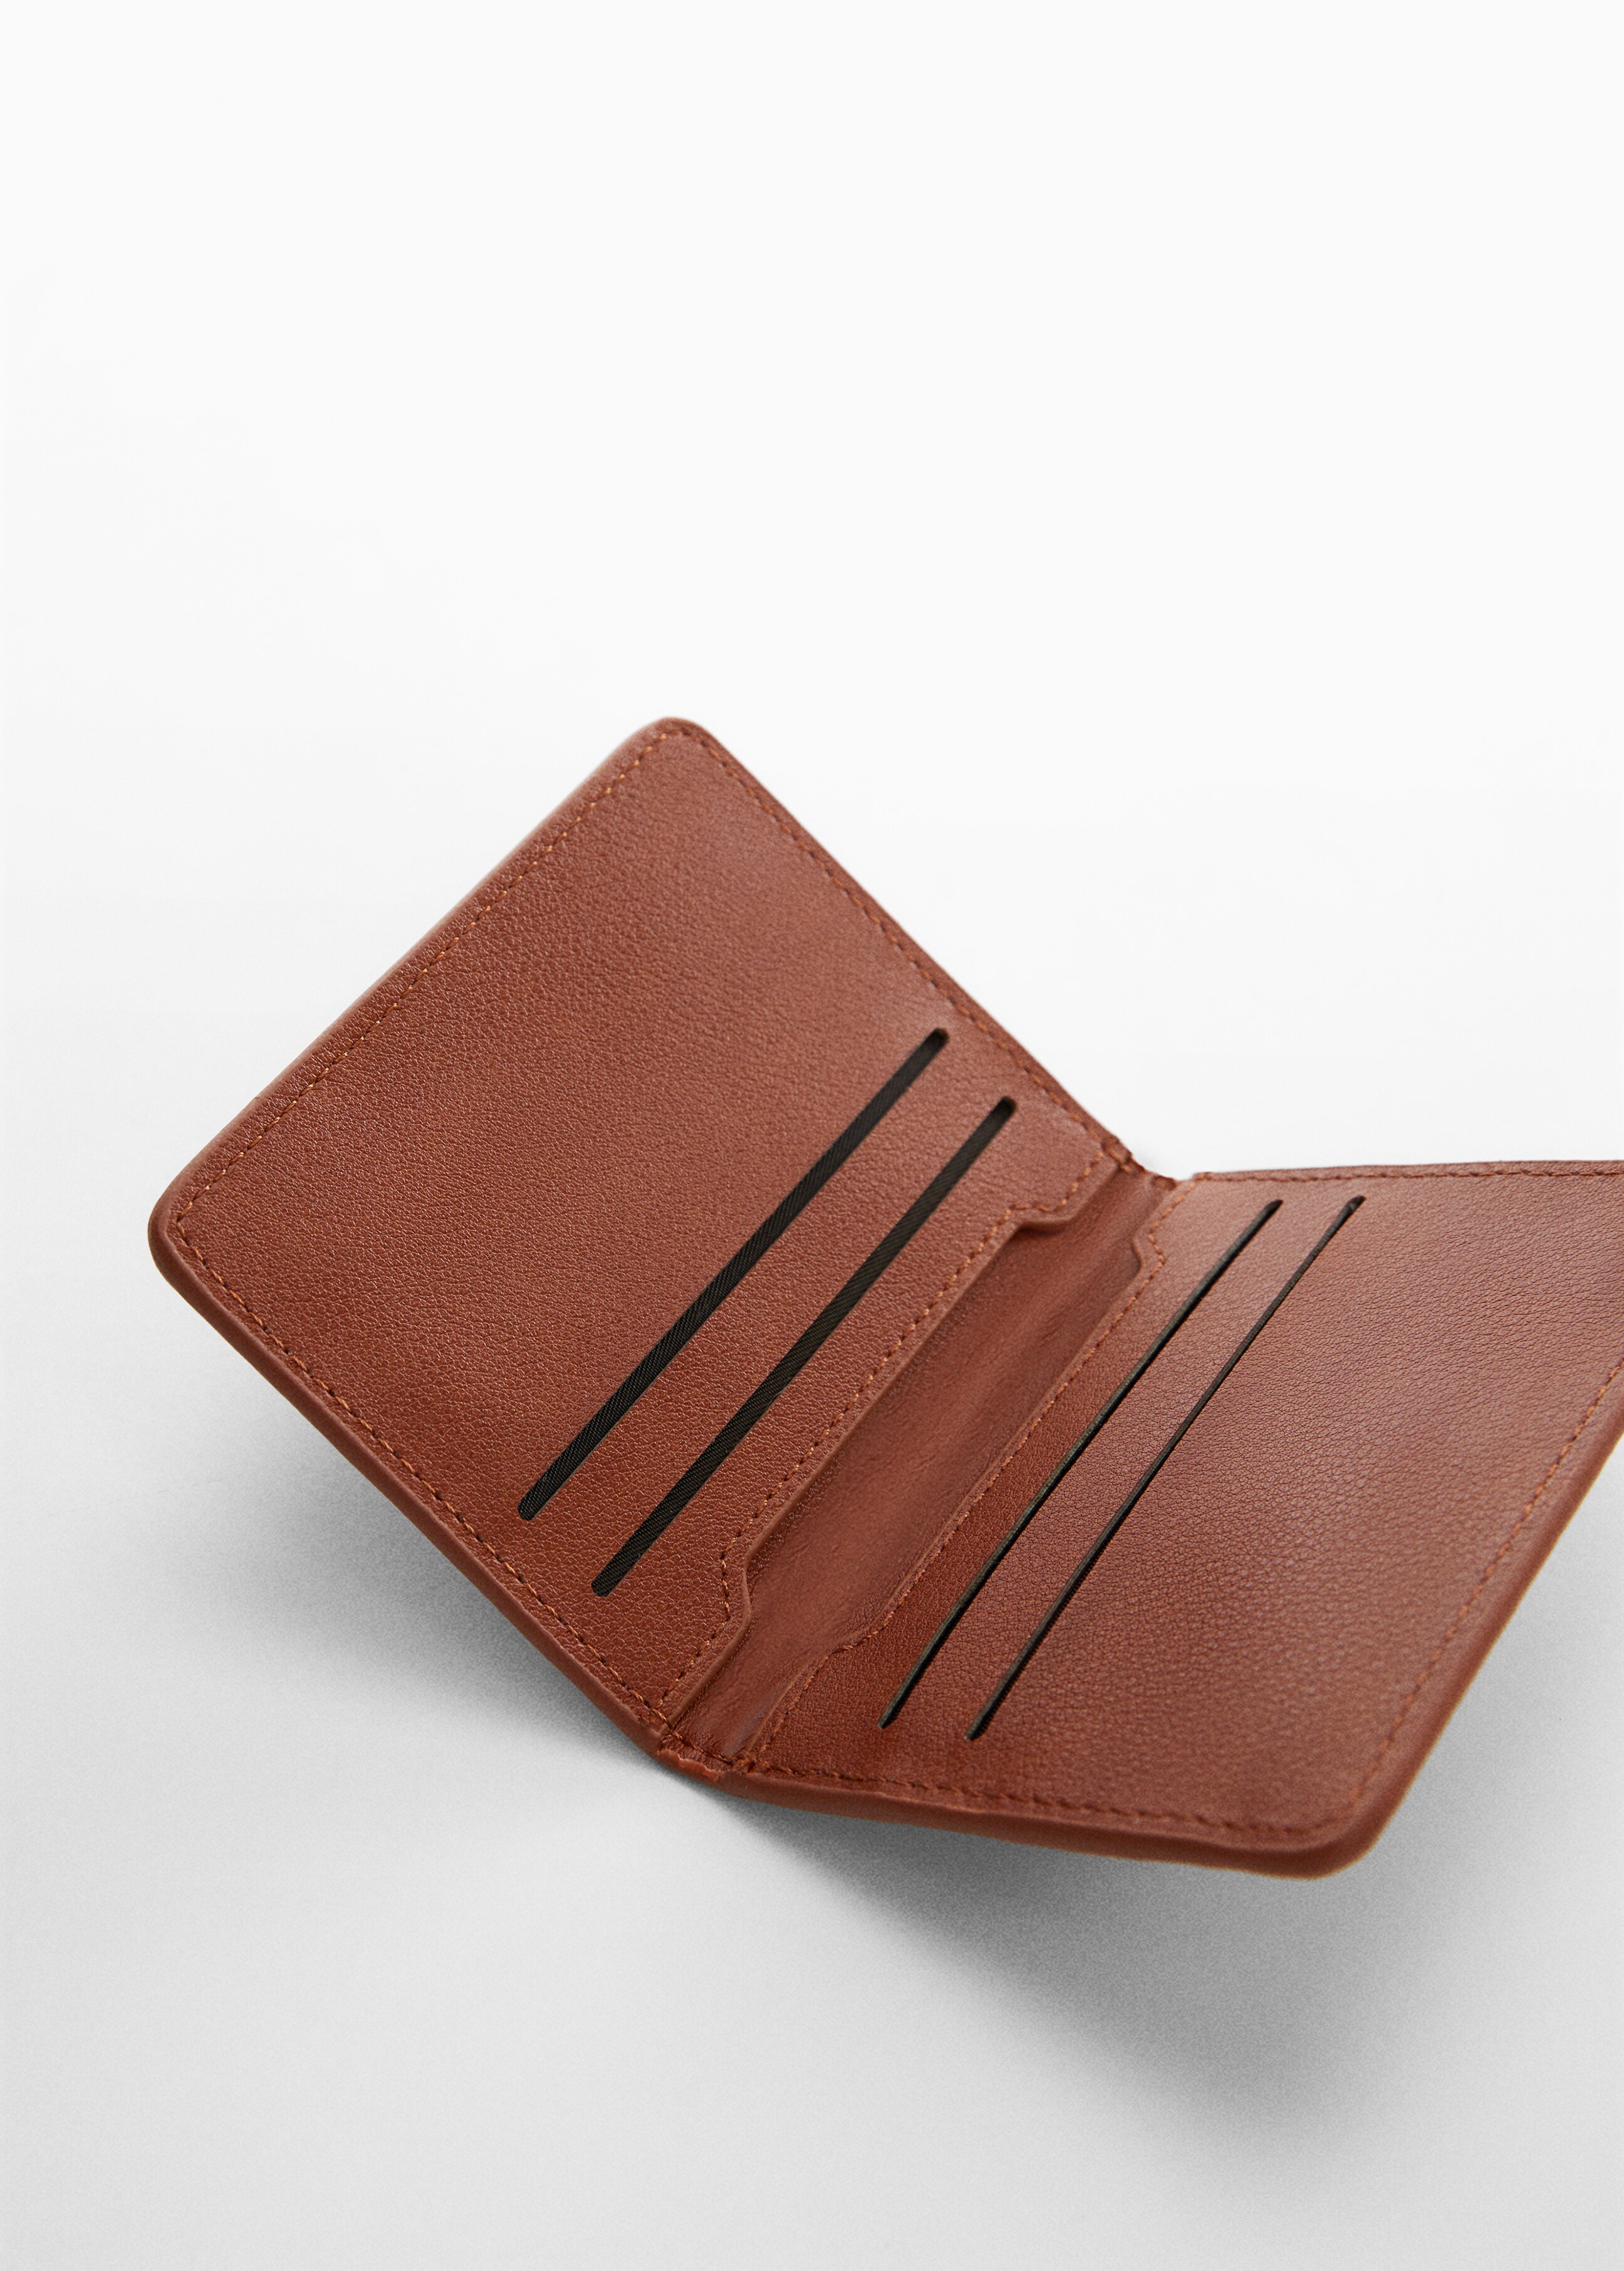 Anti-contactless leather card holder - Medium plane